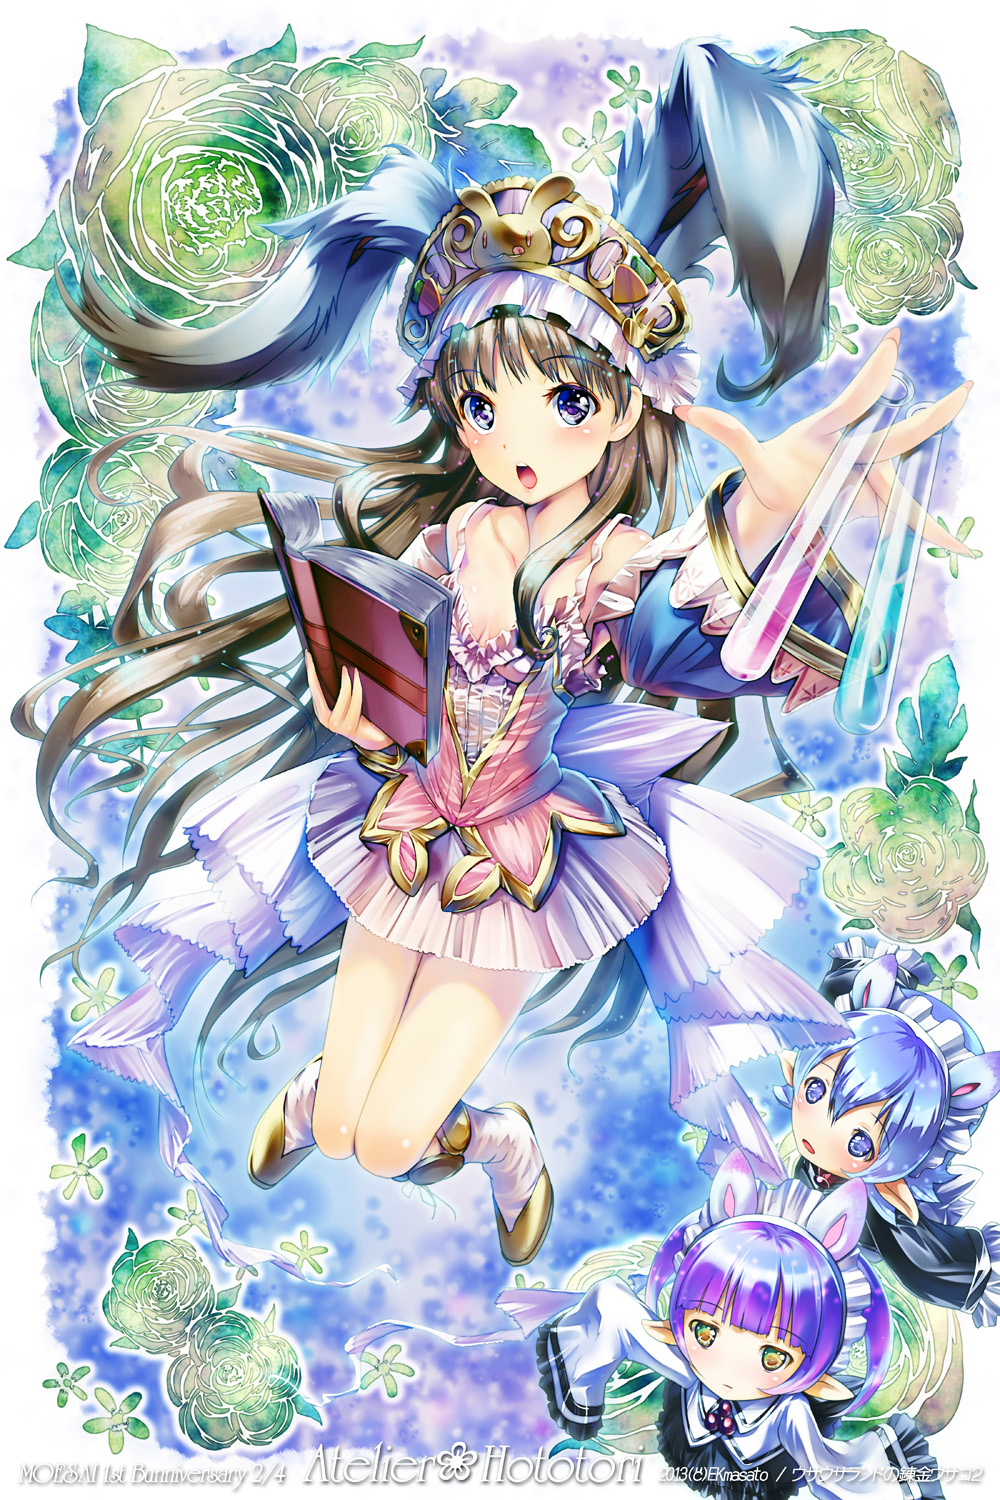 2013 2girls animal_ears anniversary atelier_(series) atelier_totori between_fingers blue_eyes blue_hair book boots bow brown_hair bunny_ears chim_(atelier) ek_masato expressionless flask floral_background full_body hat highres kemonomimi_mode knee_boots long_hair multiple_girls open_mouth portmanteau purple_hair ribbon short_hair skirt totooria_helmold yellow_eyes